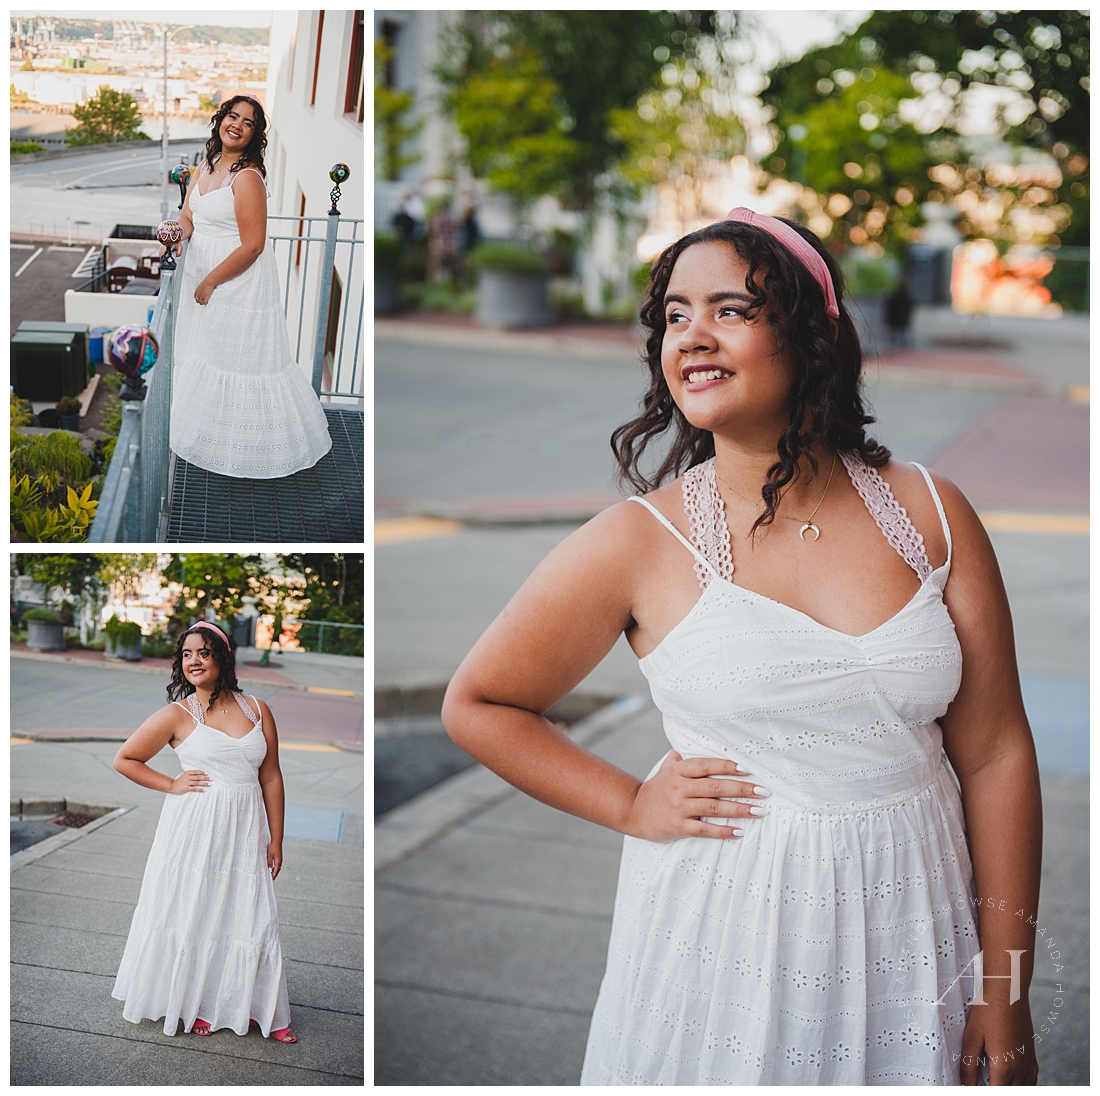 High School Senior Girl in a White Maxi Dress and Pink Headband | Summer Senior Portraits, Outdoor Senior Portraits in Tacoma, Opera Alley Locations for Senior Portraits | Photographed by the Best Tacoma Senior Portrait Photographer Amanda Howse